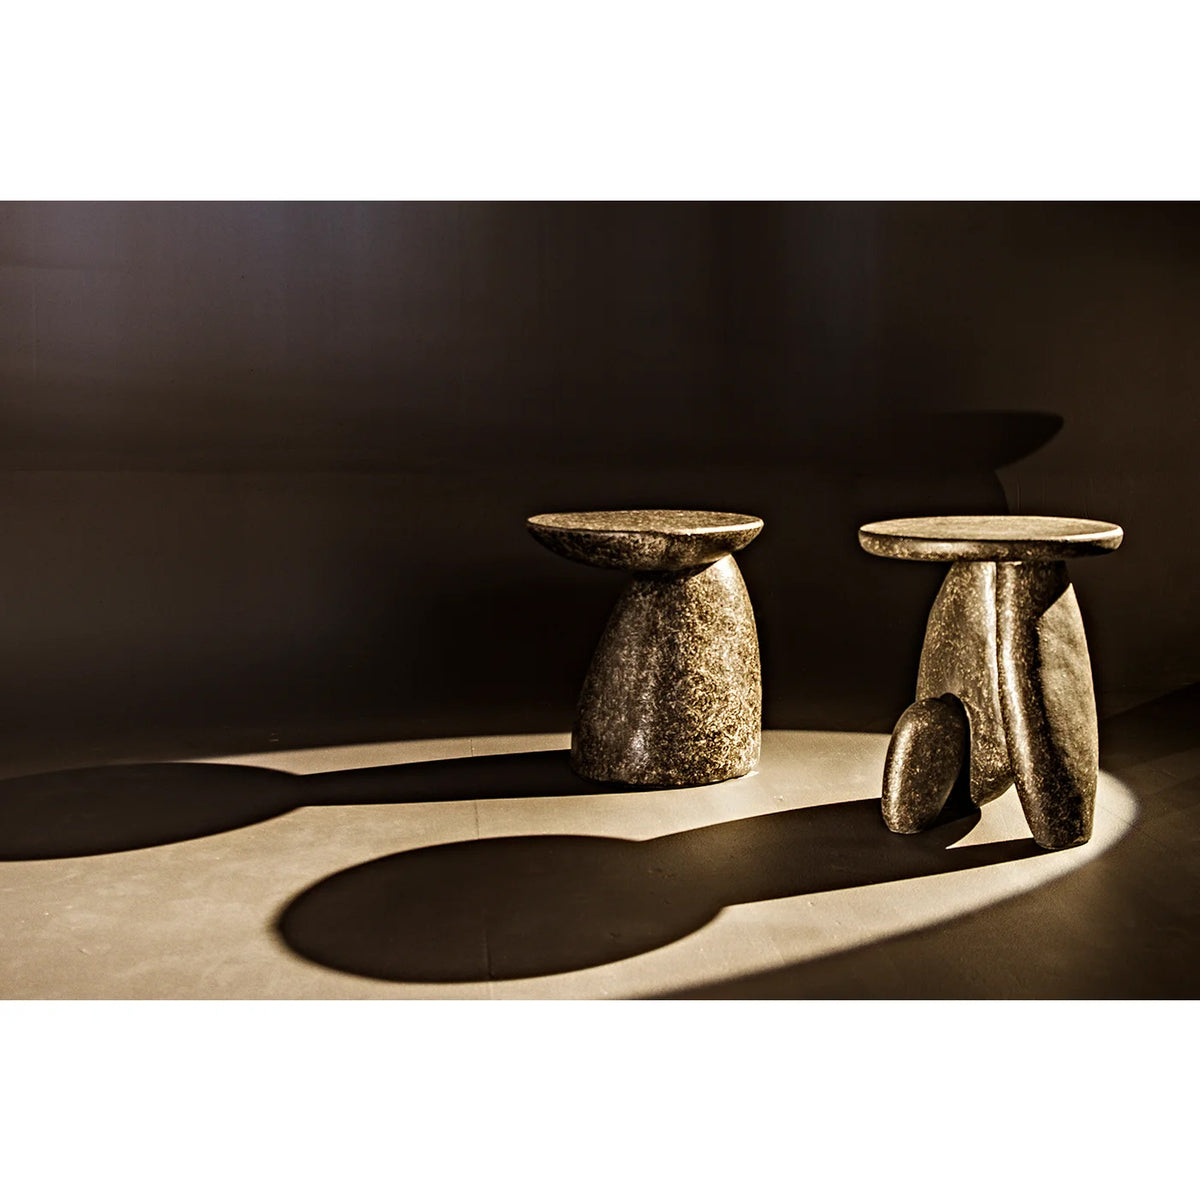 Cairn Side Table